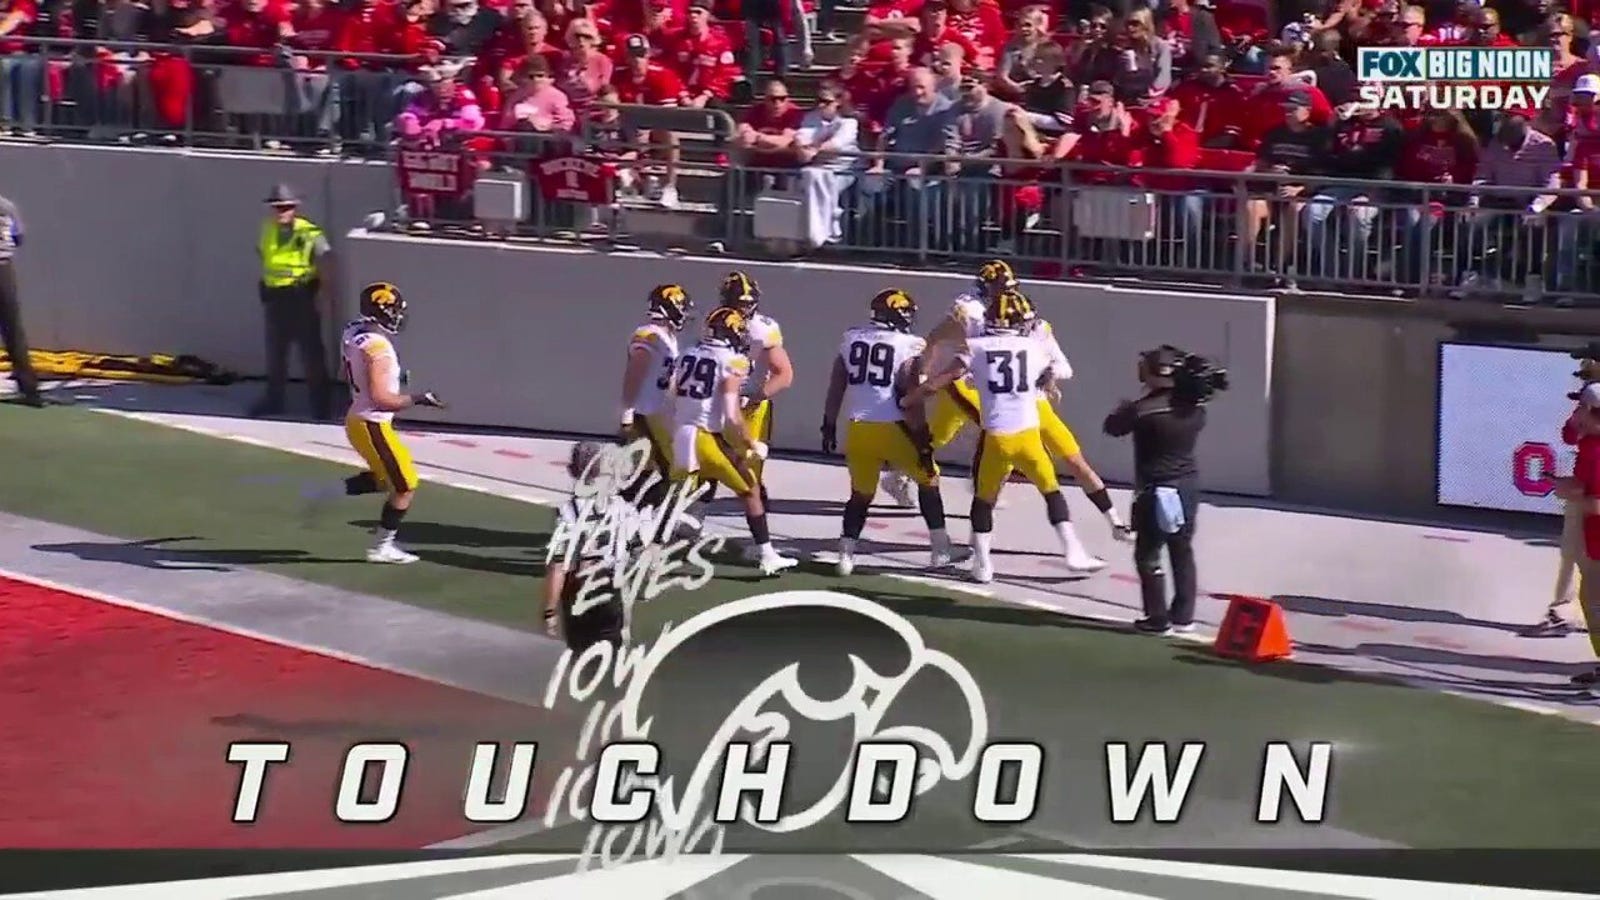 Iowa's Joe Evans recovers a fumble and runs it back for an 11-yard touchdown